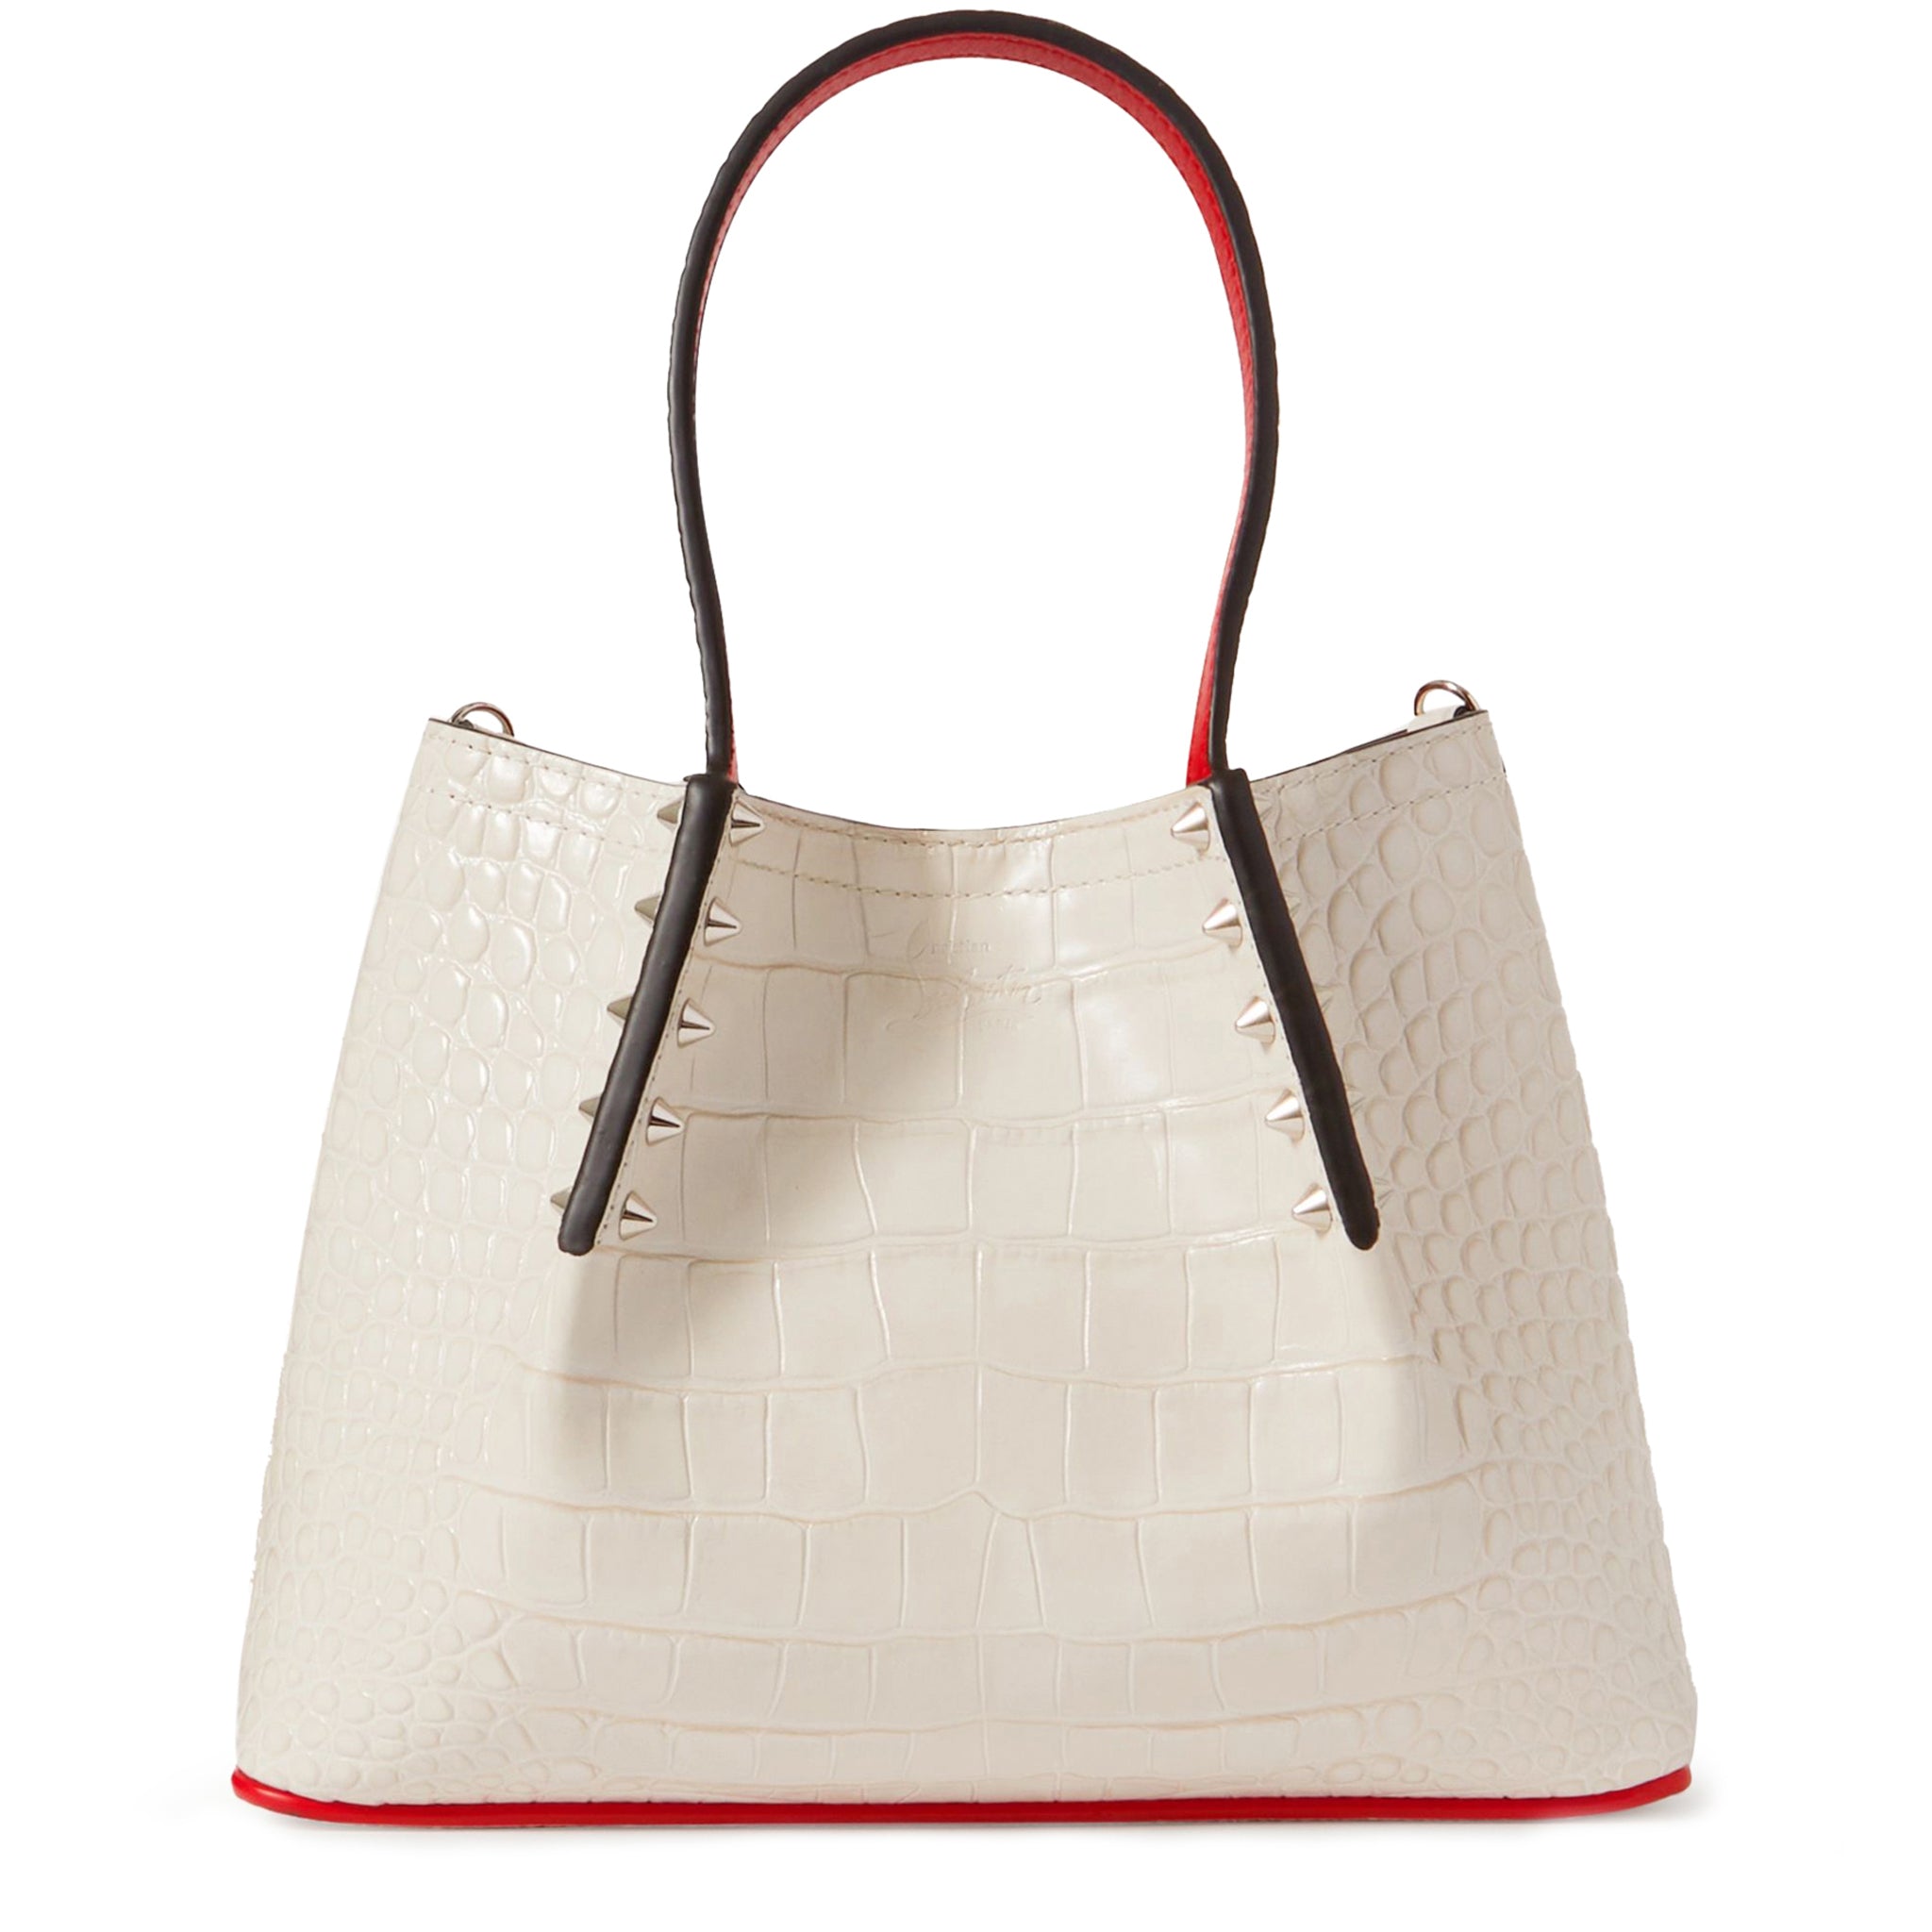 Totes bags Christian Louboutin - Large Cabarock Tote bag in white